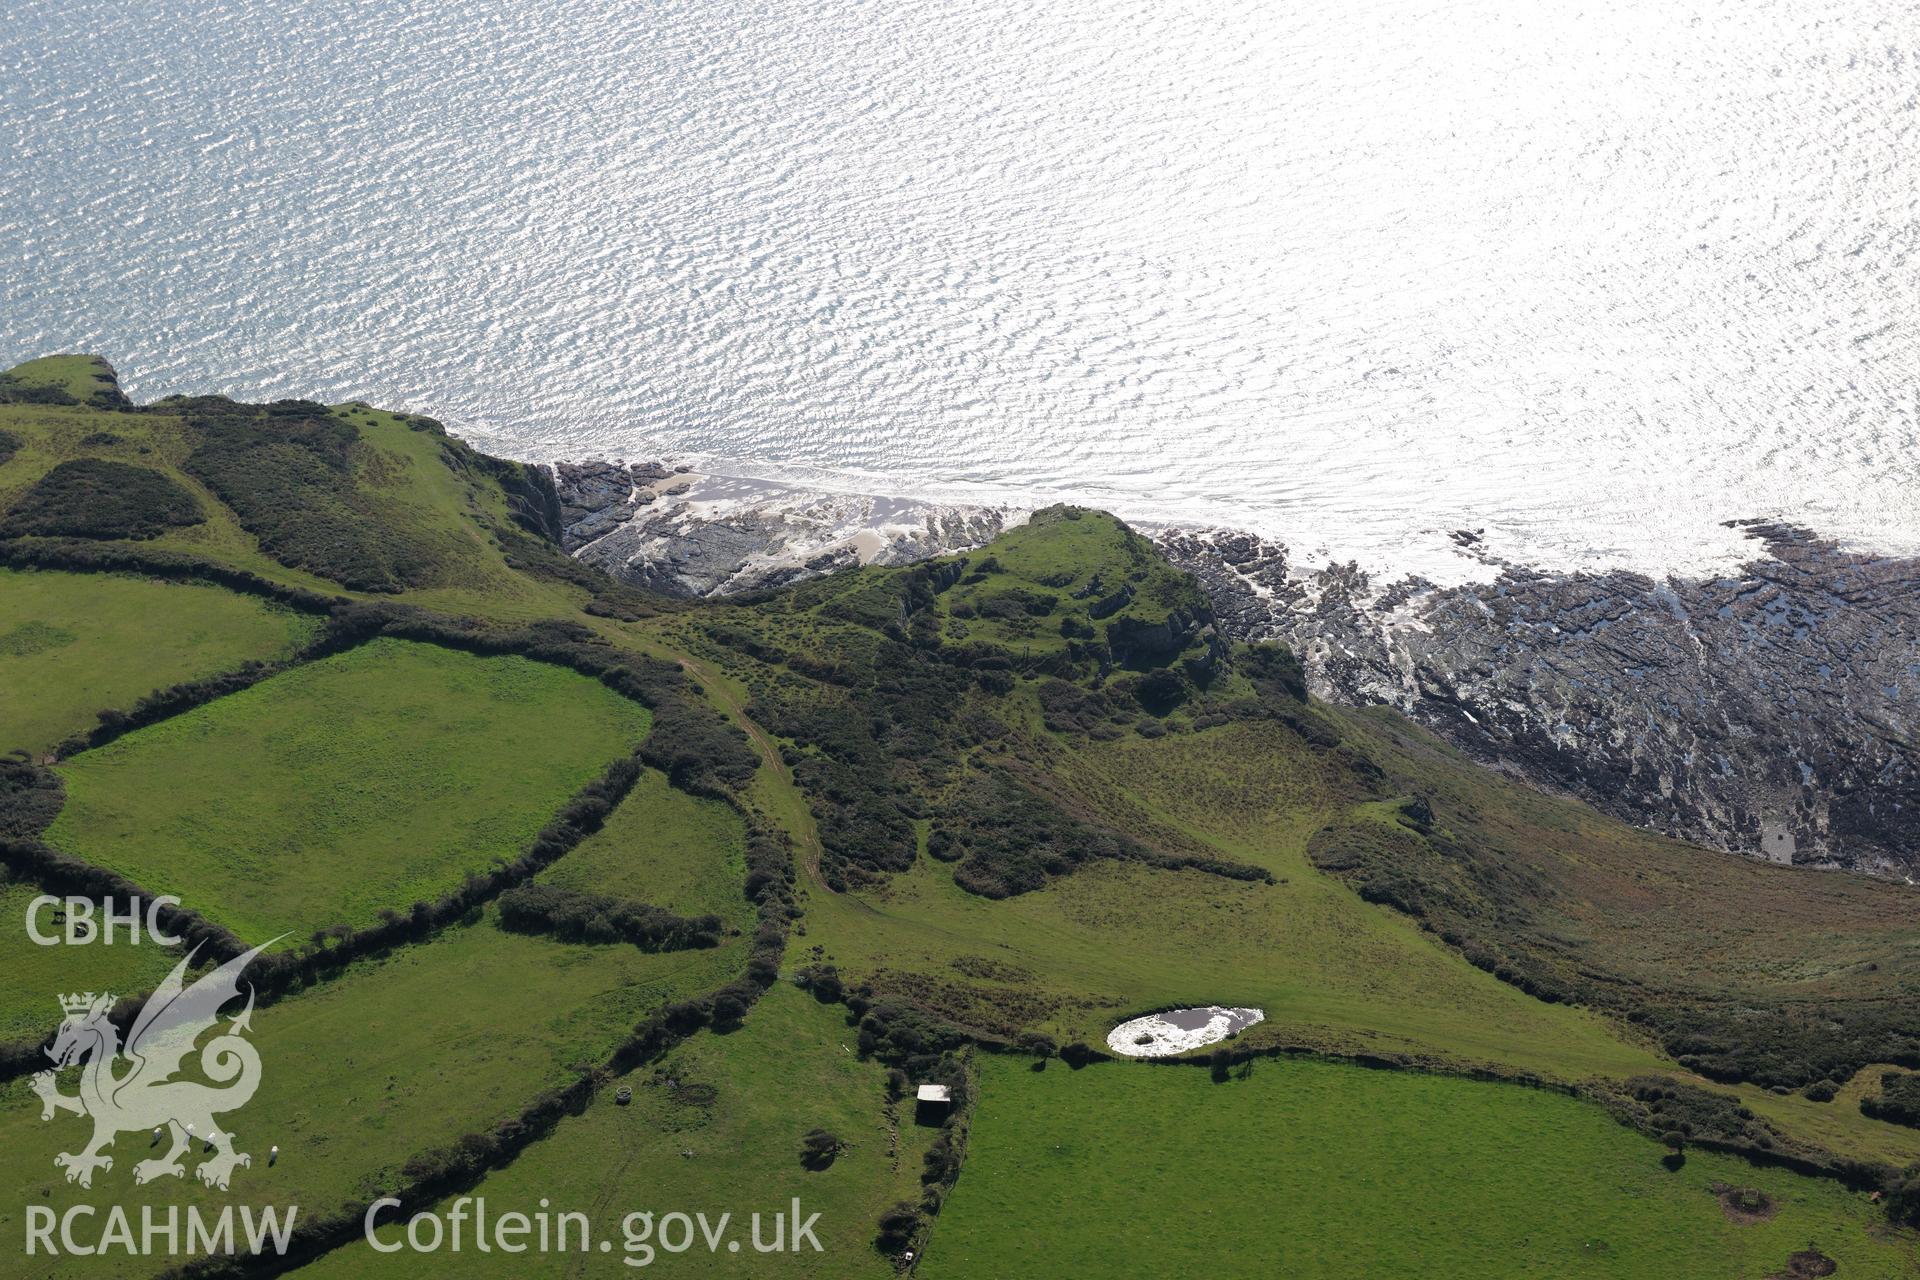 High Pennard hillfort on Pwlldu Head cliffs, on the southern coast of the Gower Peninsula. Oblique aerial photograph taken during the Royal Commission's programme of archaeological aerial reconnaissance by Toby Driver on 30th September 2015.